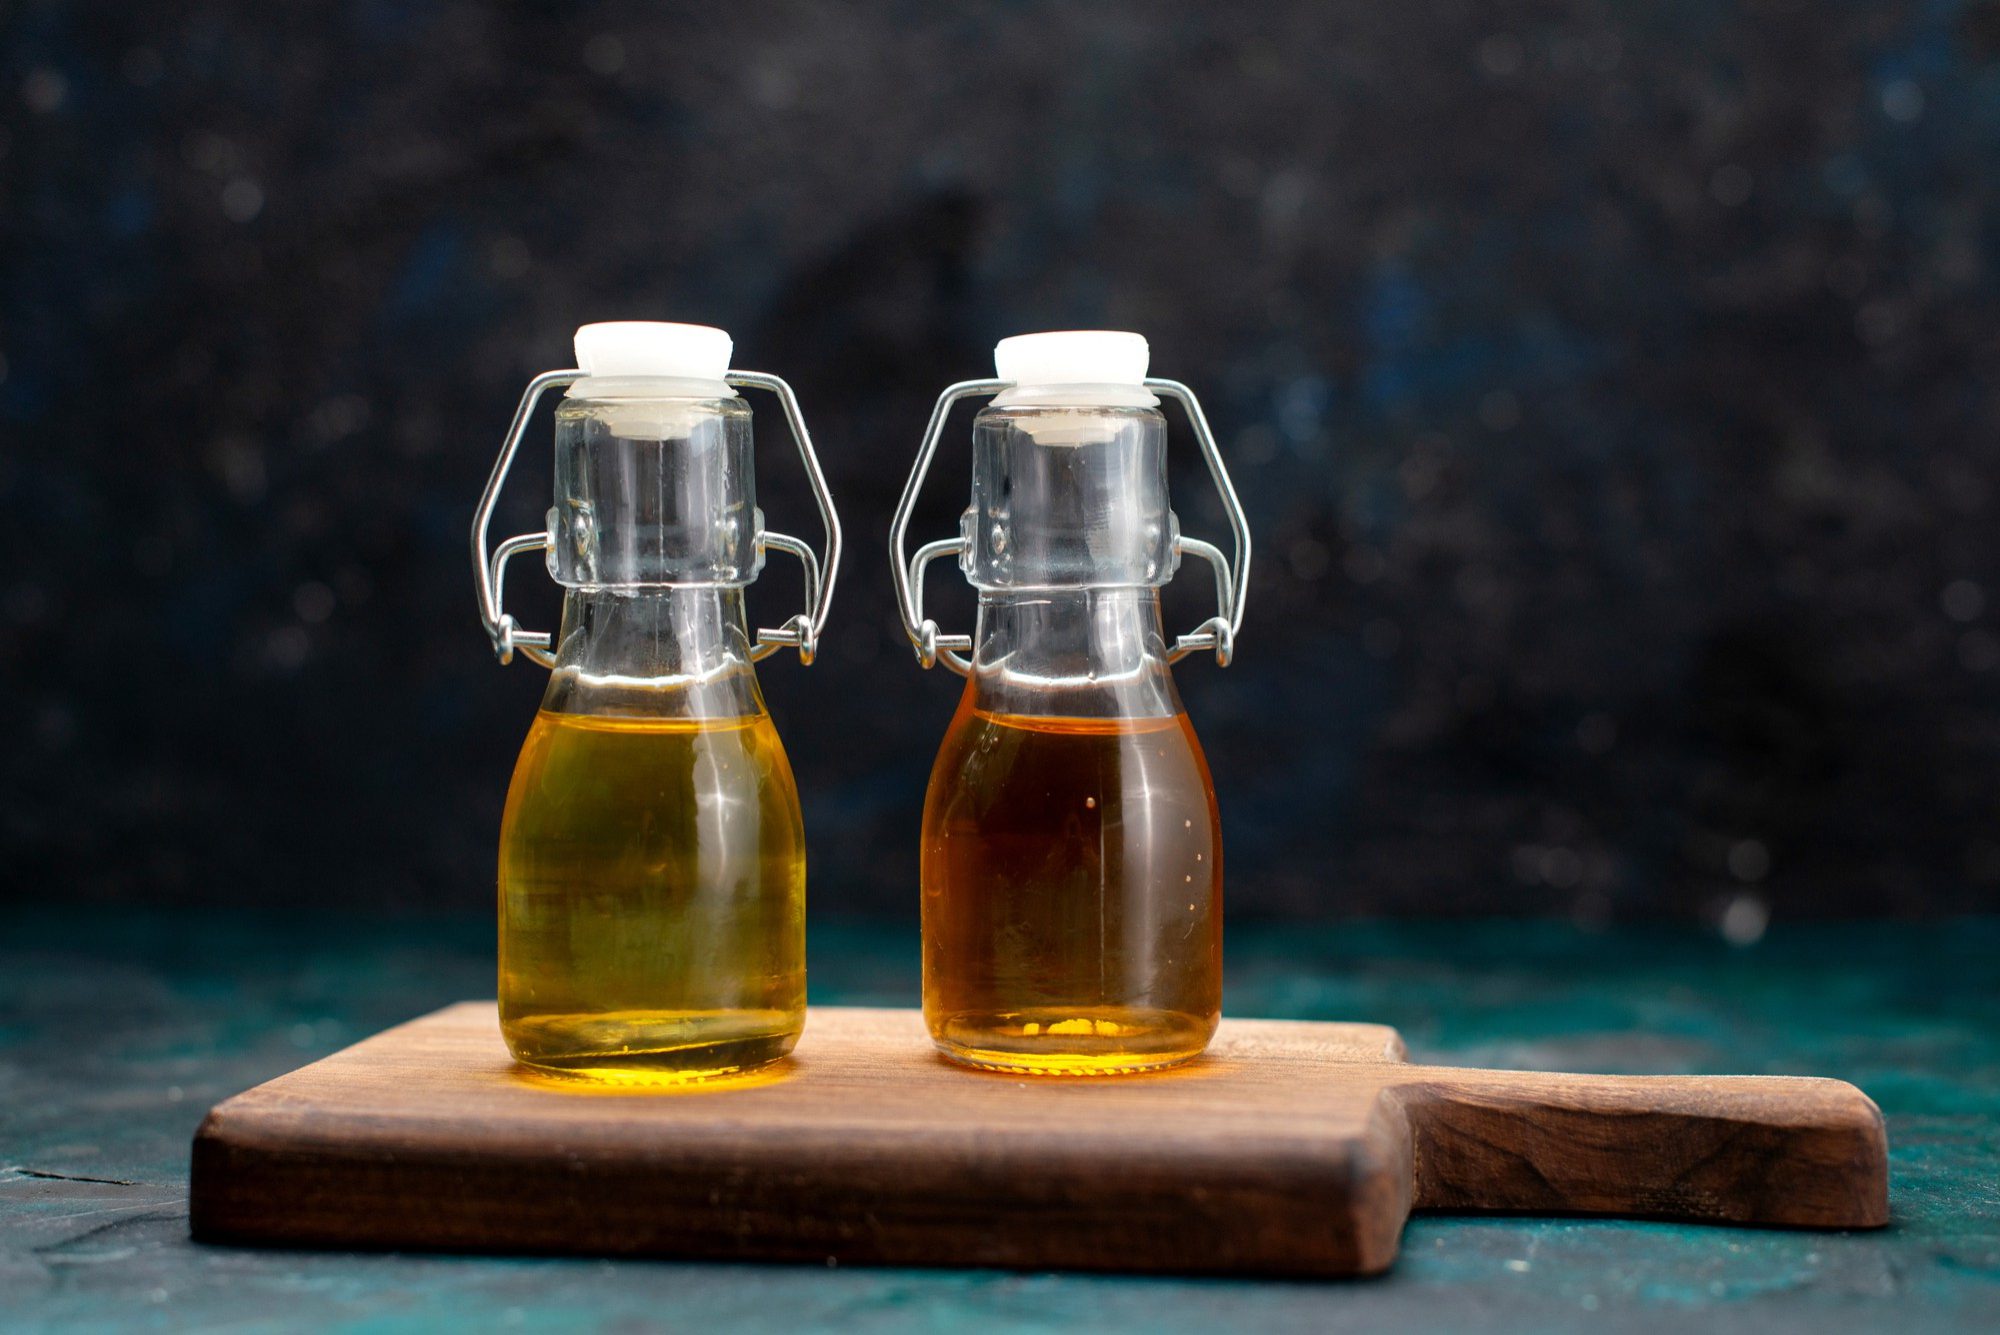 Two bottles of StableMAX cooking oil on a cutting board, ready for culinary use.